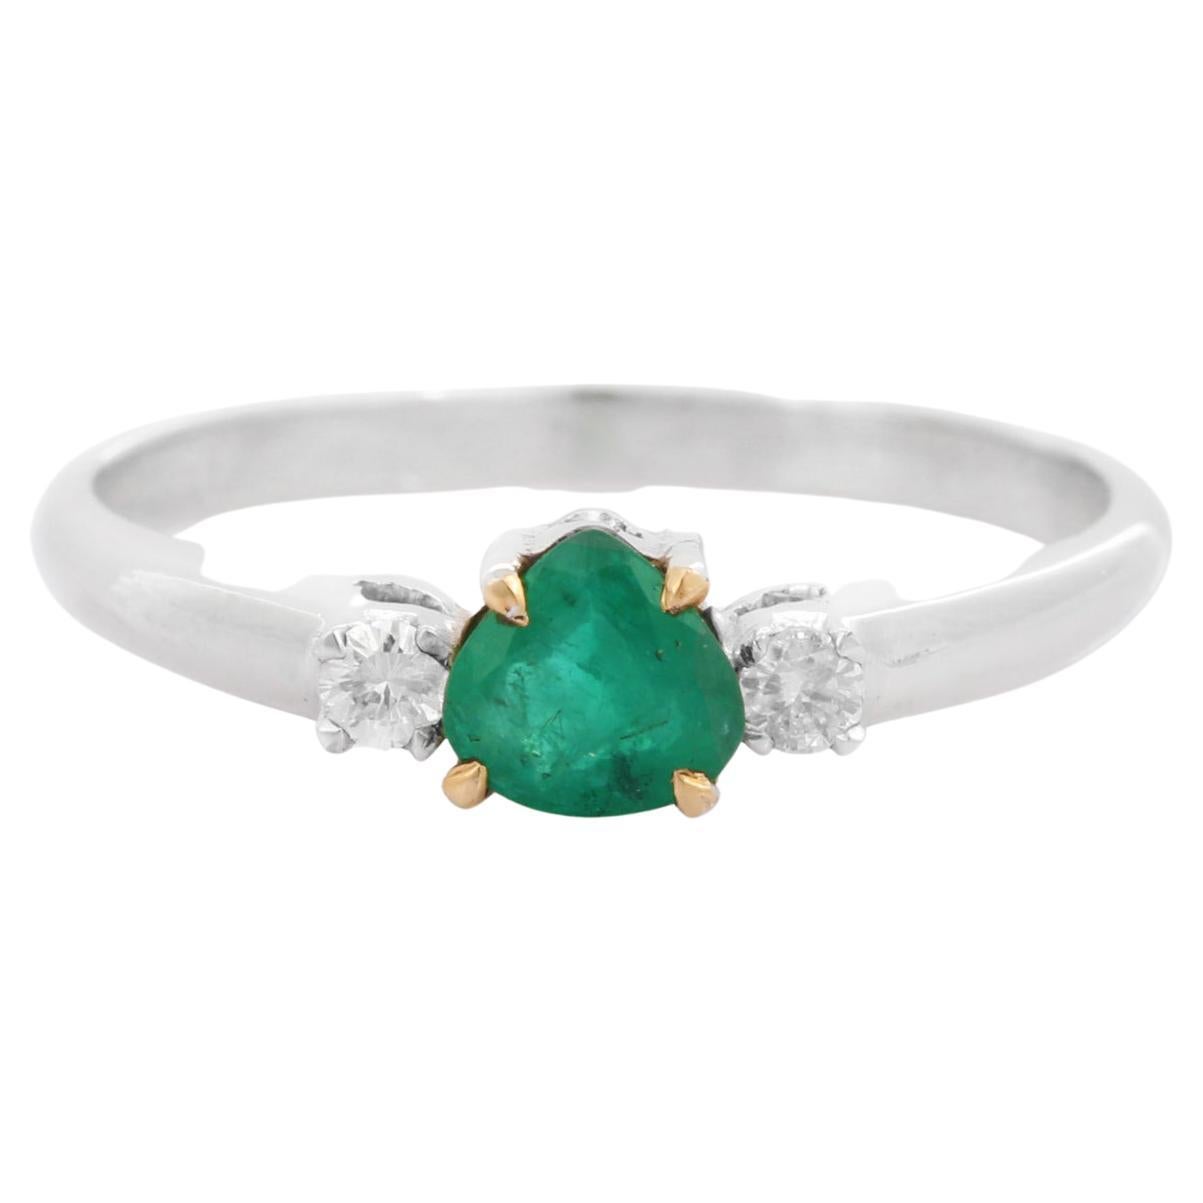 For Sale:  18k Solid White Gold Emerald Ring with Diamonds